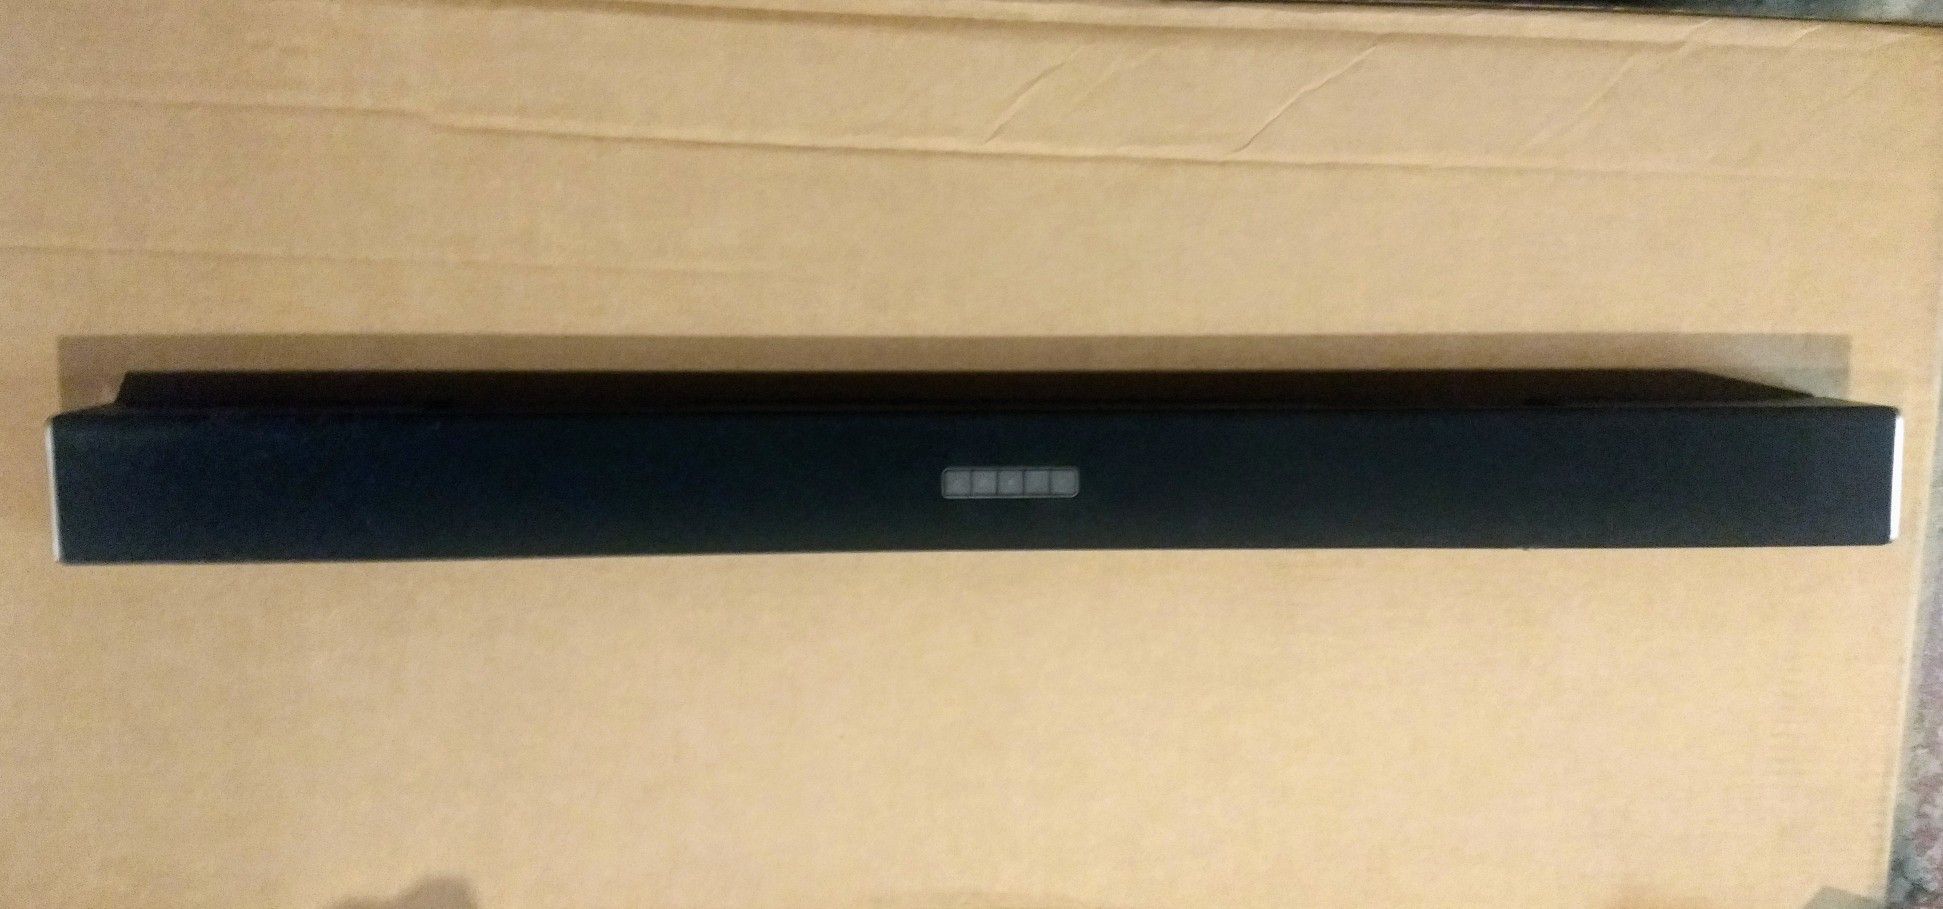 SB3851-D0 VIZIO Soundbar sound bar "NOT Working" as is Bar only no subwoofer including no power cable.